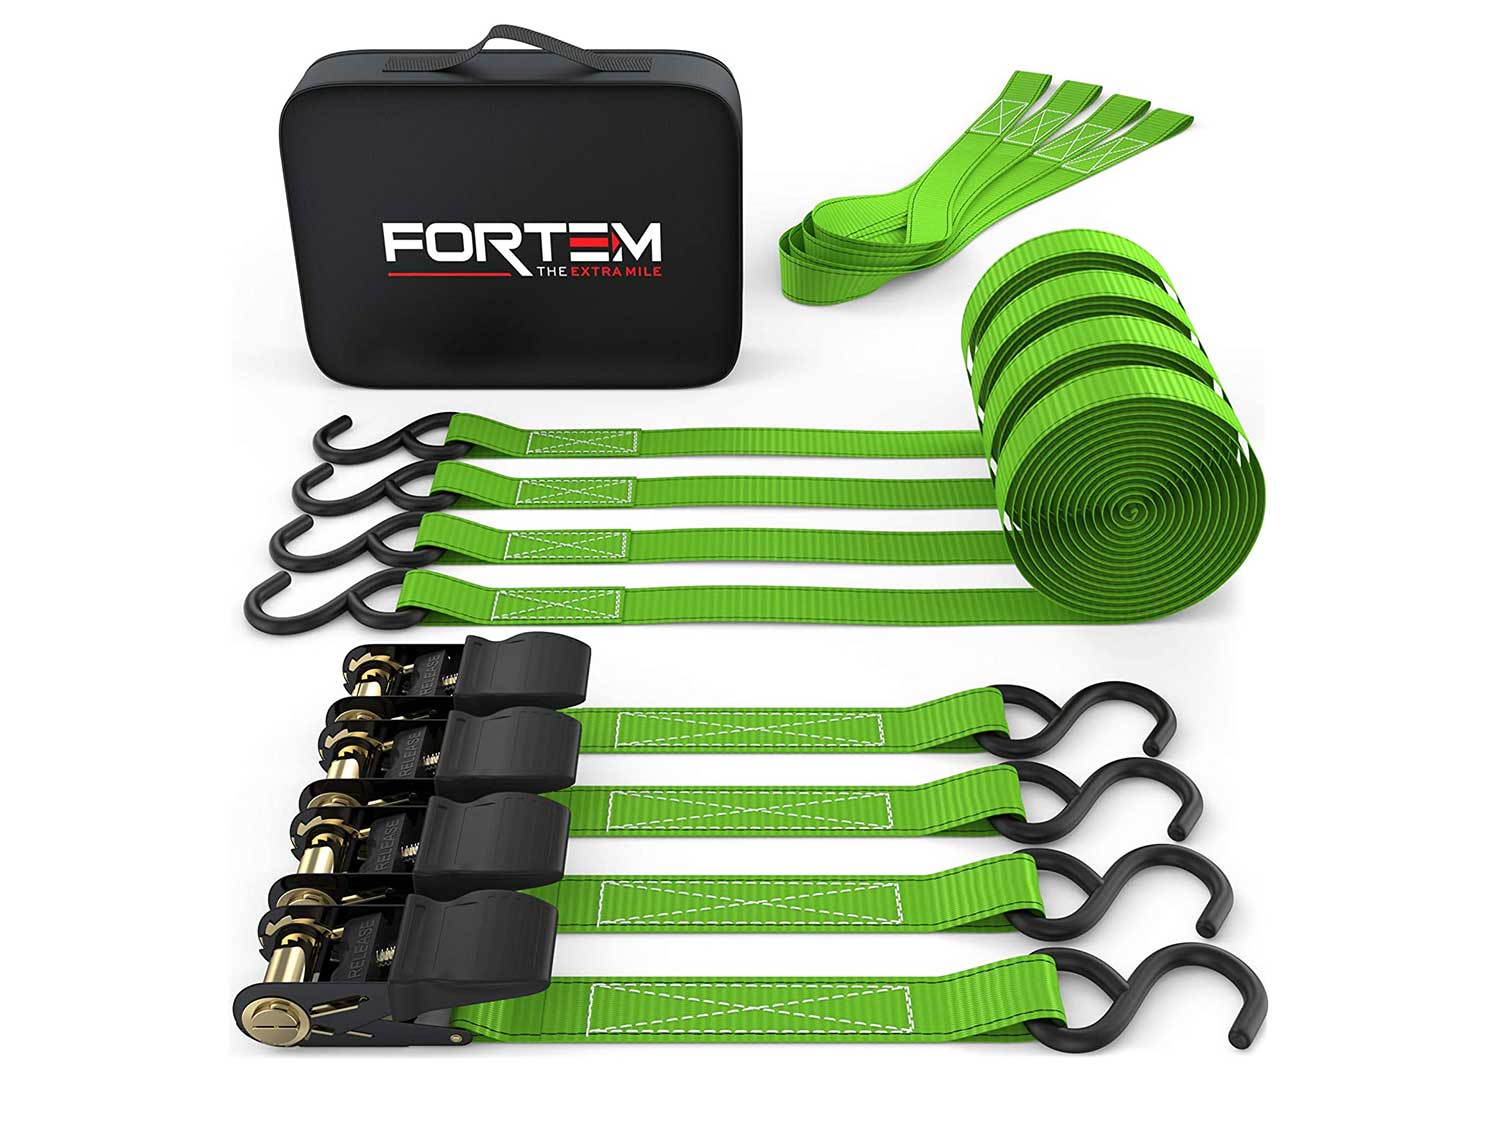 FORTEM Ratchet Tie Down Straps, 4X 15ft Securing Straps, 4X Soft Loops 1500lb Break Strength, Rubber Coated Metal Handles, Plastic Coated Metal Hooks, Carrying Case (Green)